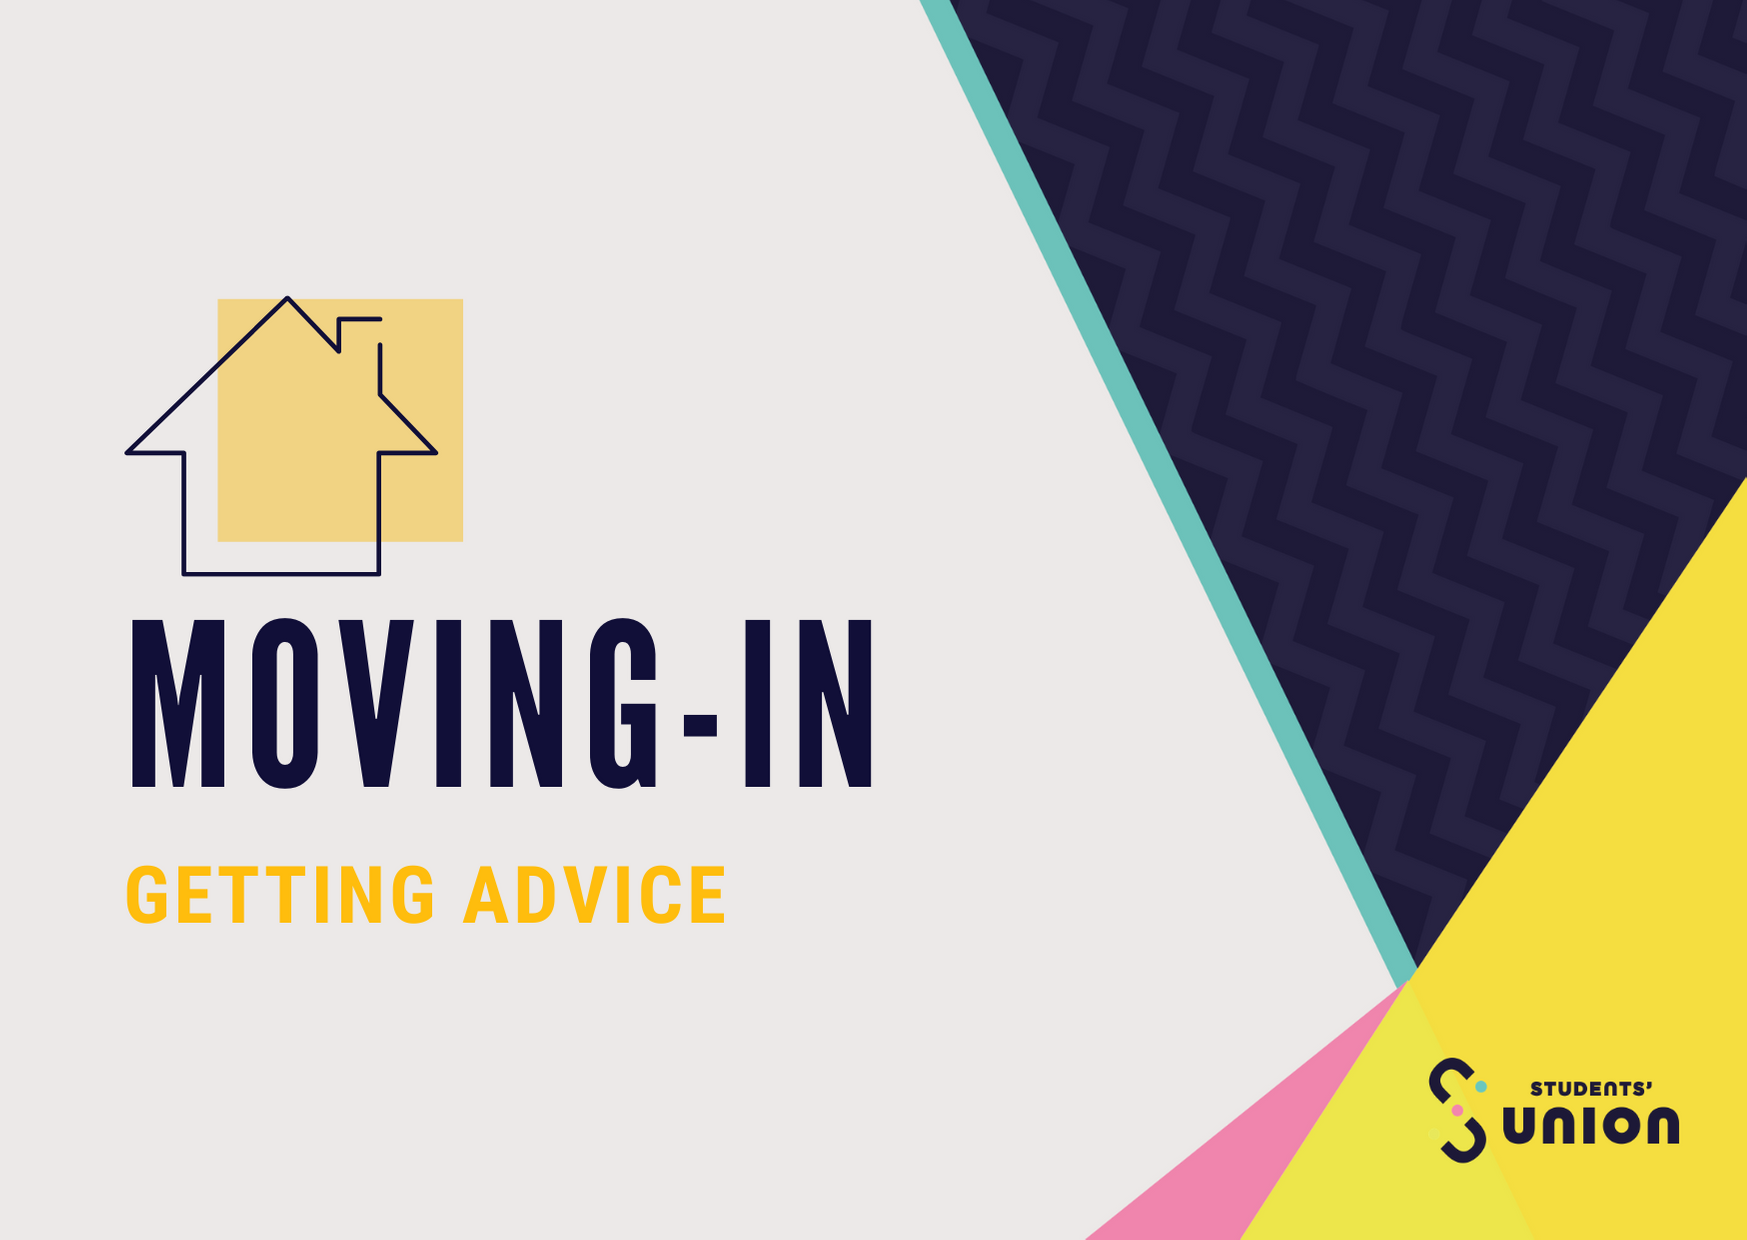 Moving-in Guide: Getting Advice